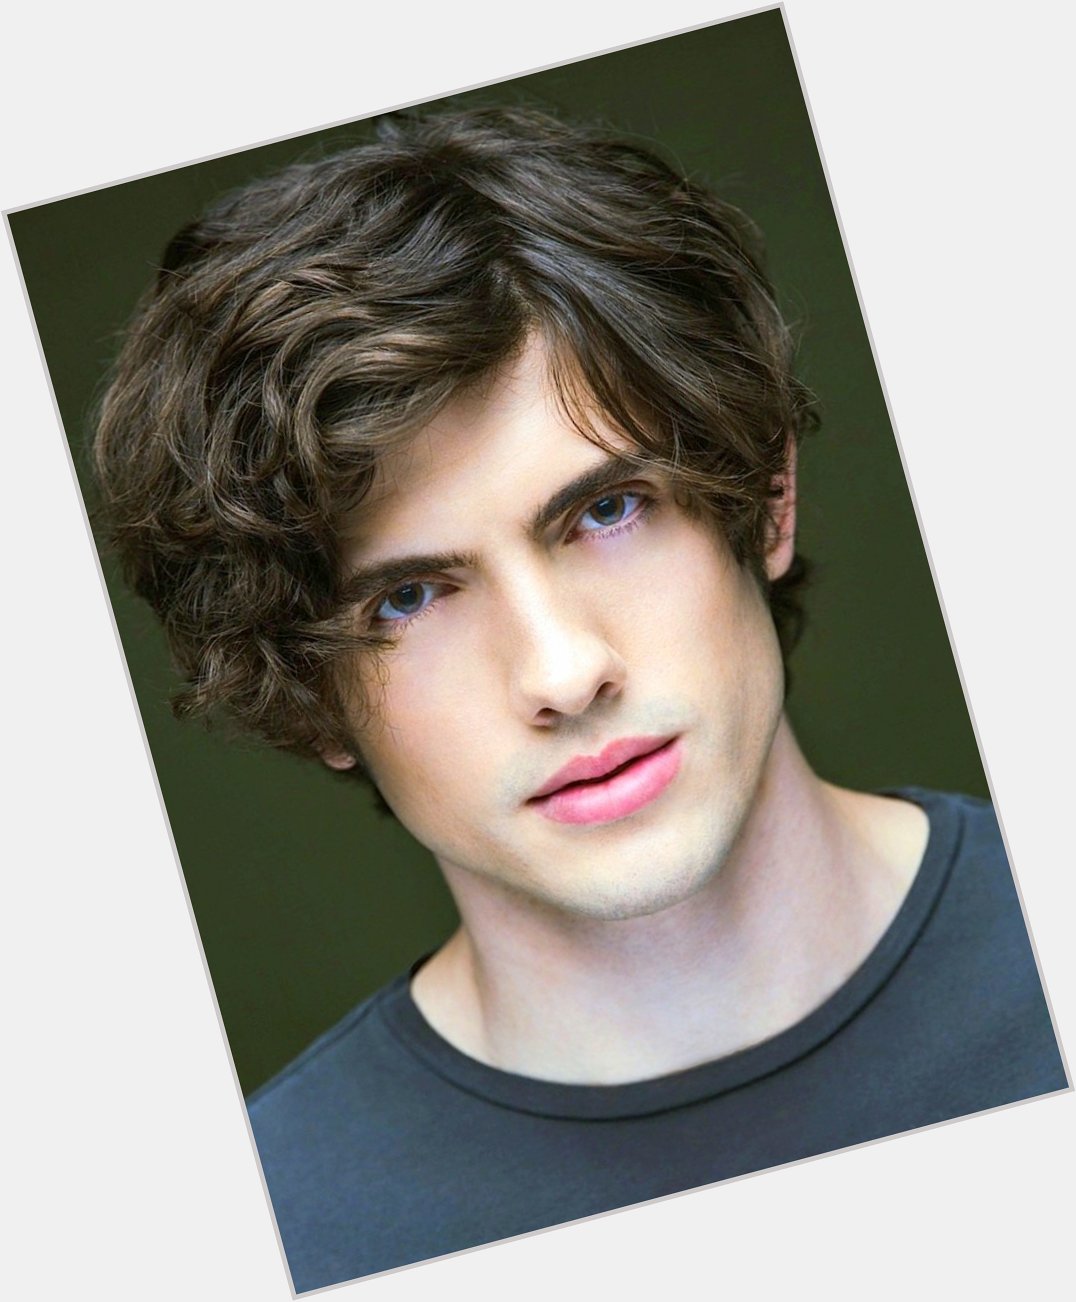 Carter Jenkins September 4 Sending Very Happy Birthday Wishes! Continued Success! 